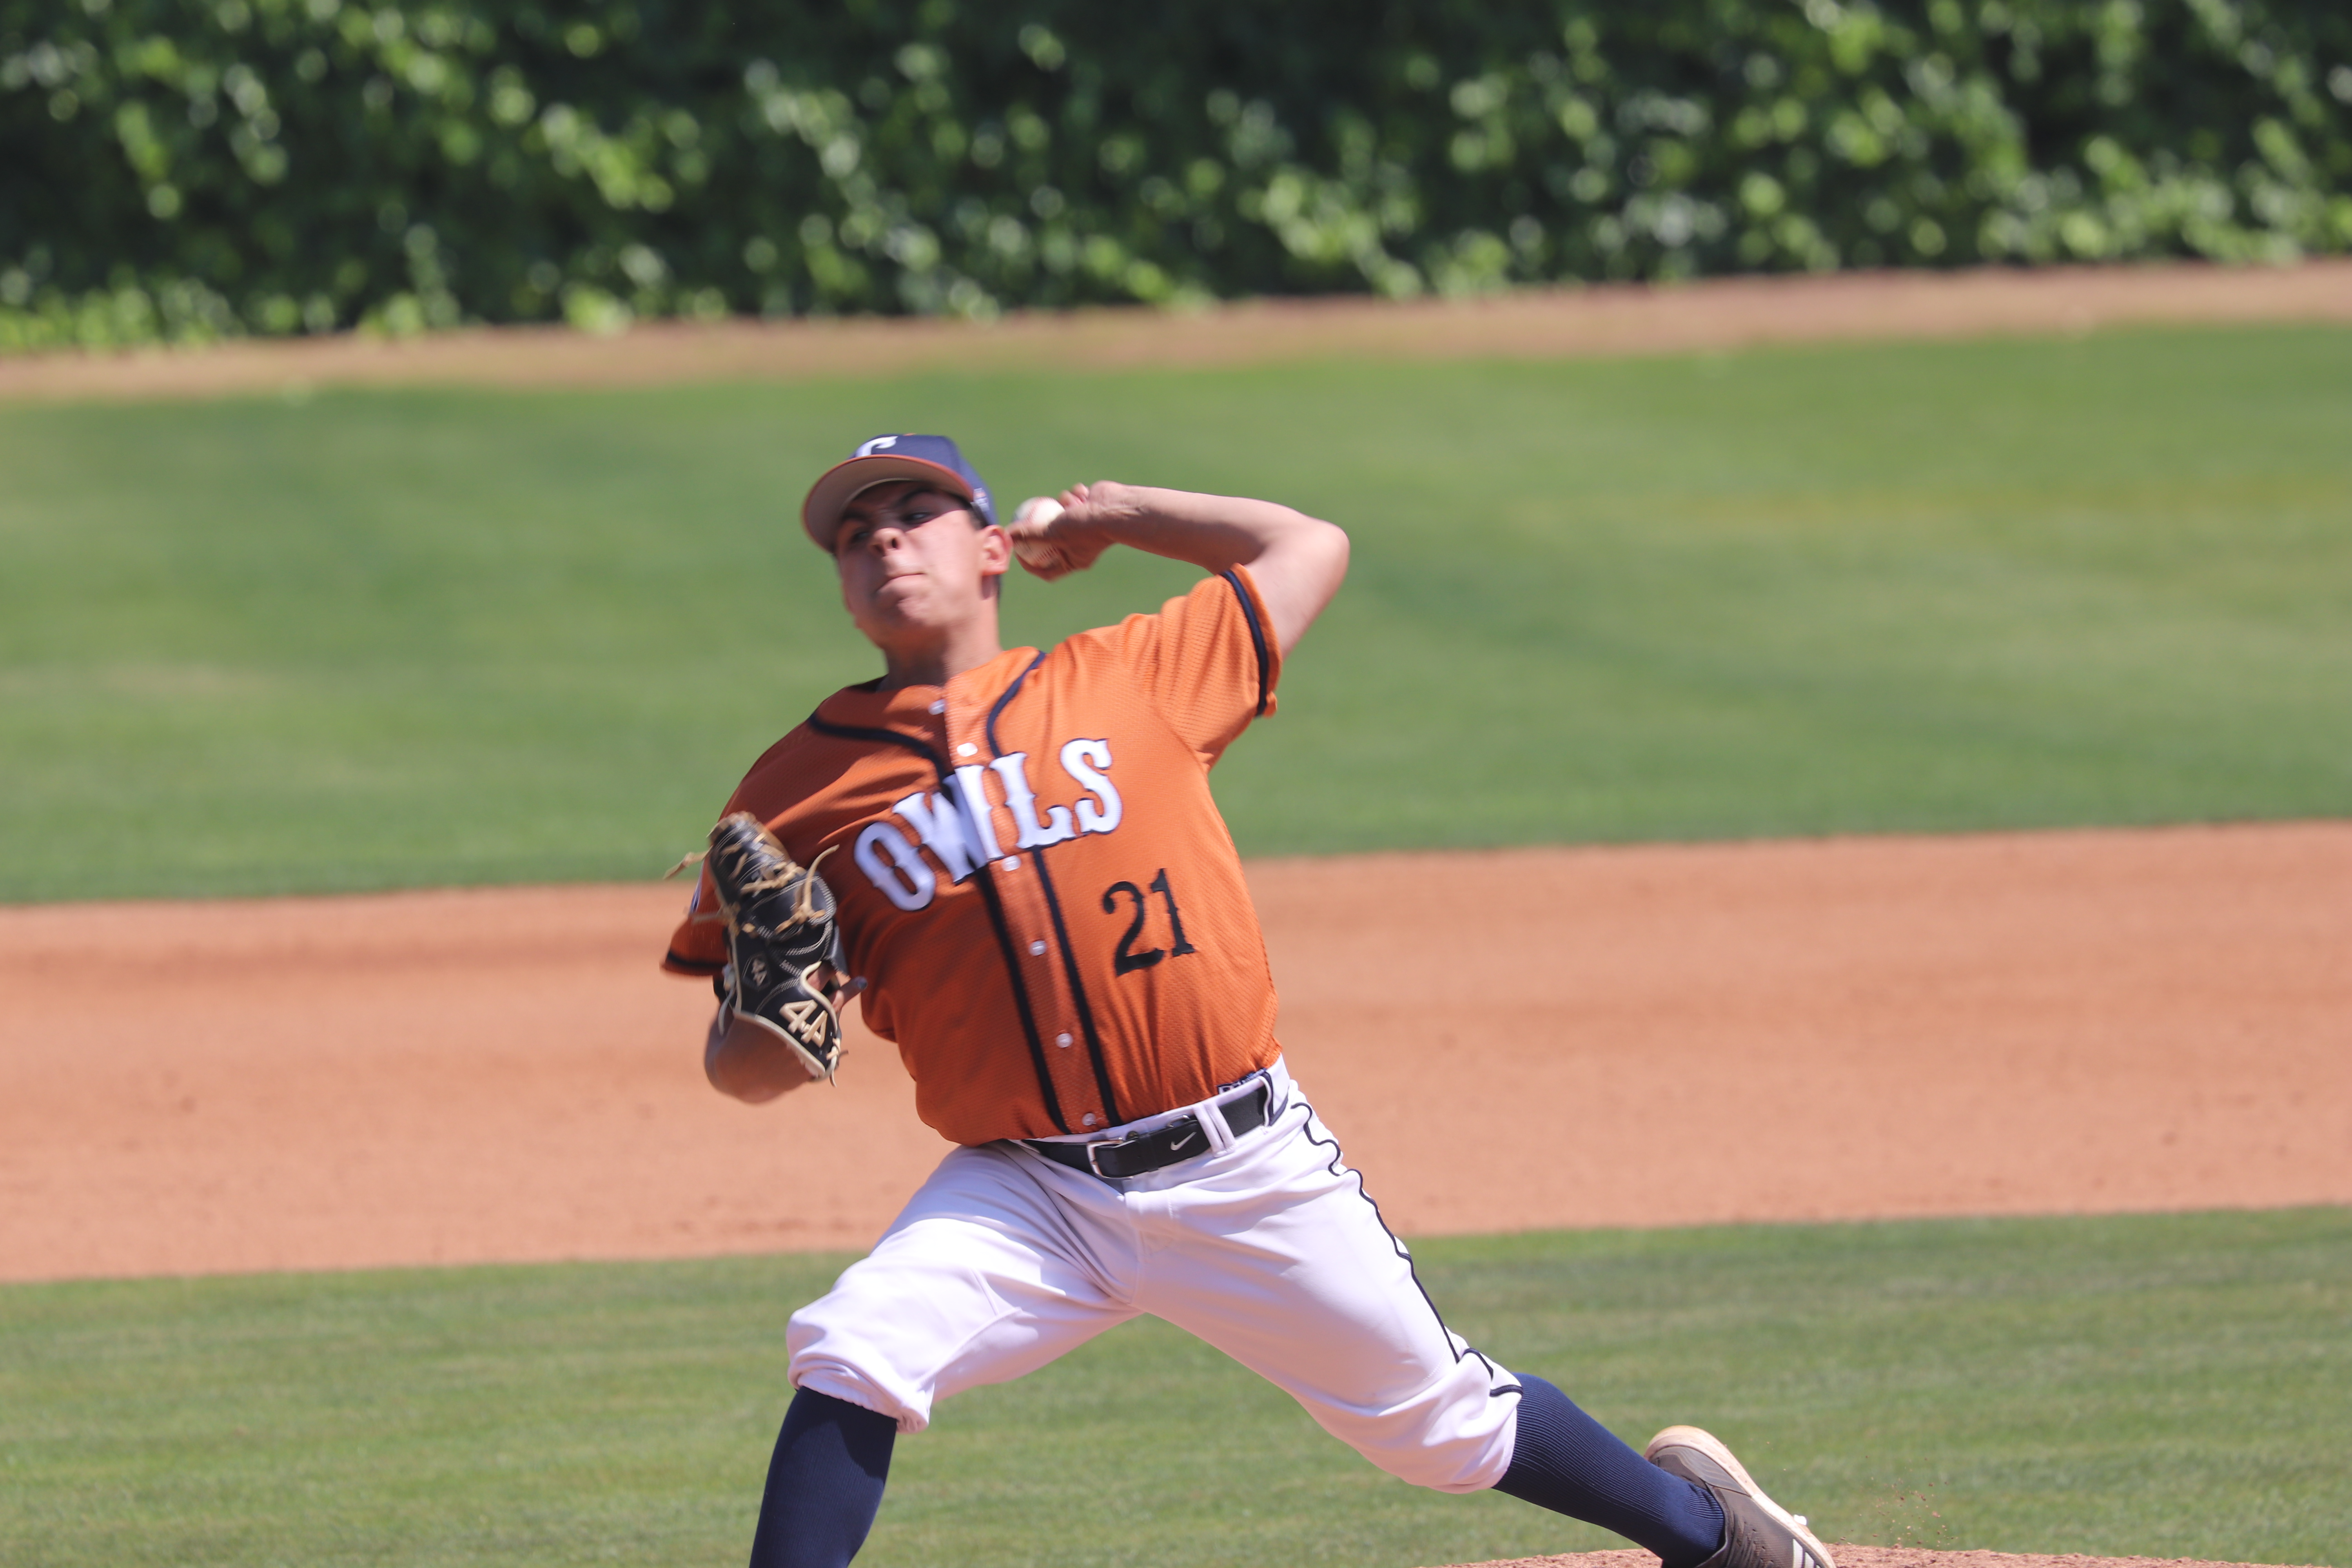 Relief pitching wins series for Owls